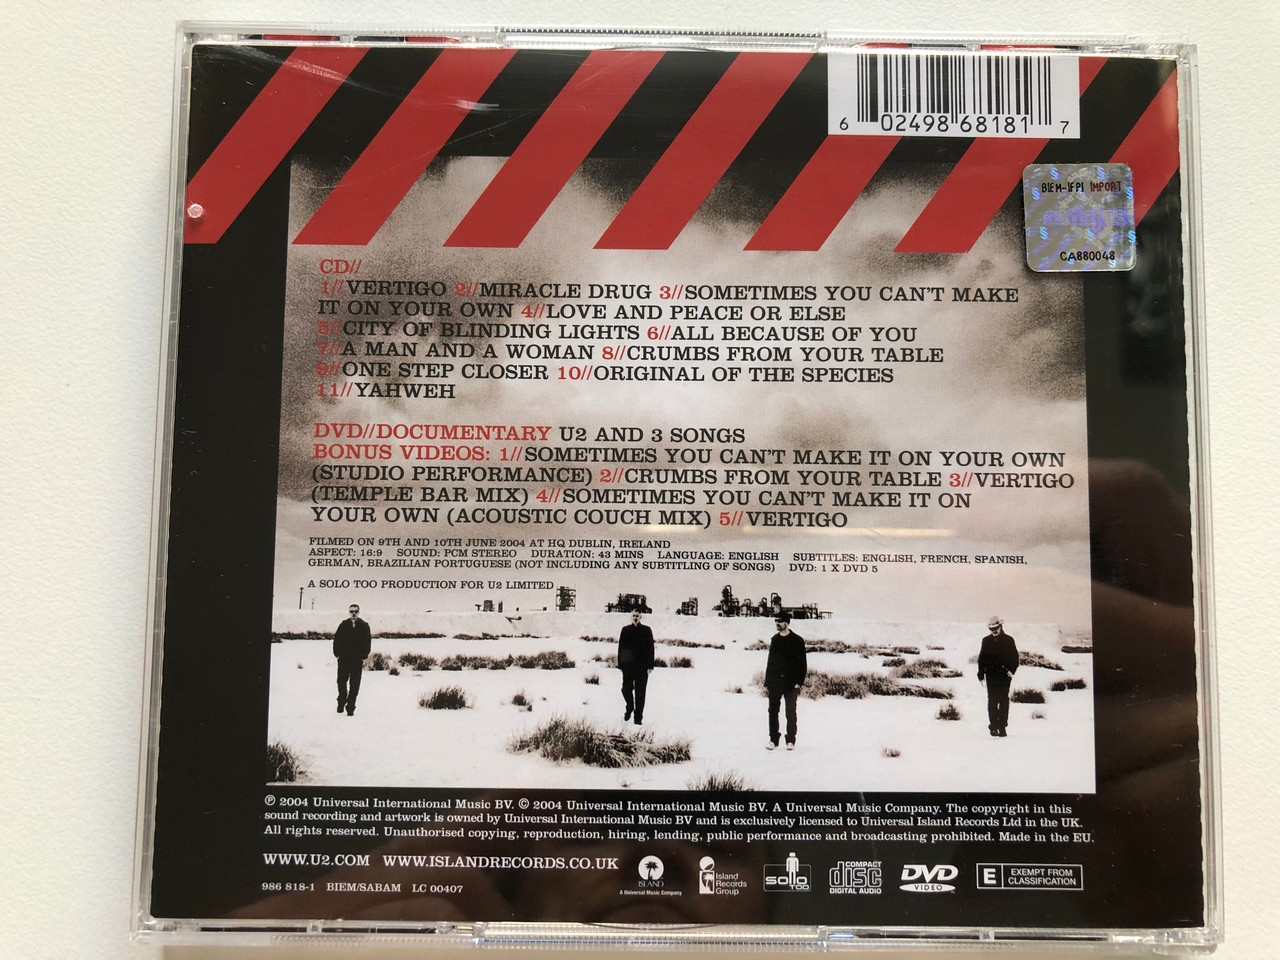 U2 – How To Dismantle An Atomic Bomb / Double album CD/DVD: CD: 11 new  songs featuring the hit single Vertigo; DVD: A documentary & 5 video  performances from U5 HQ /